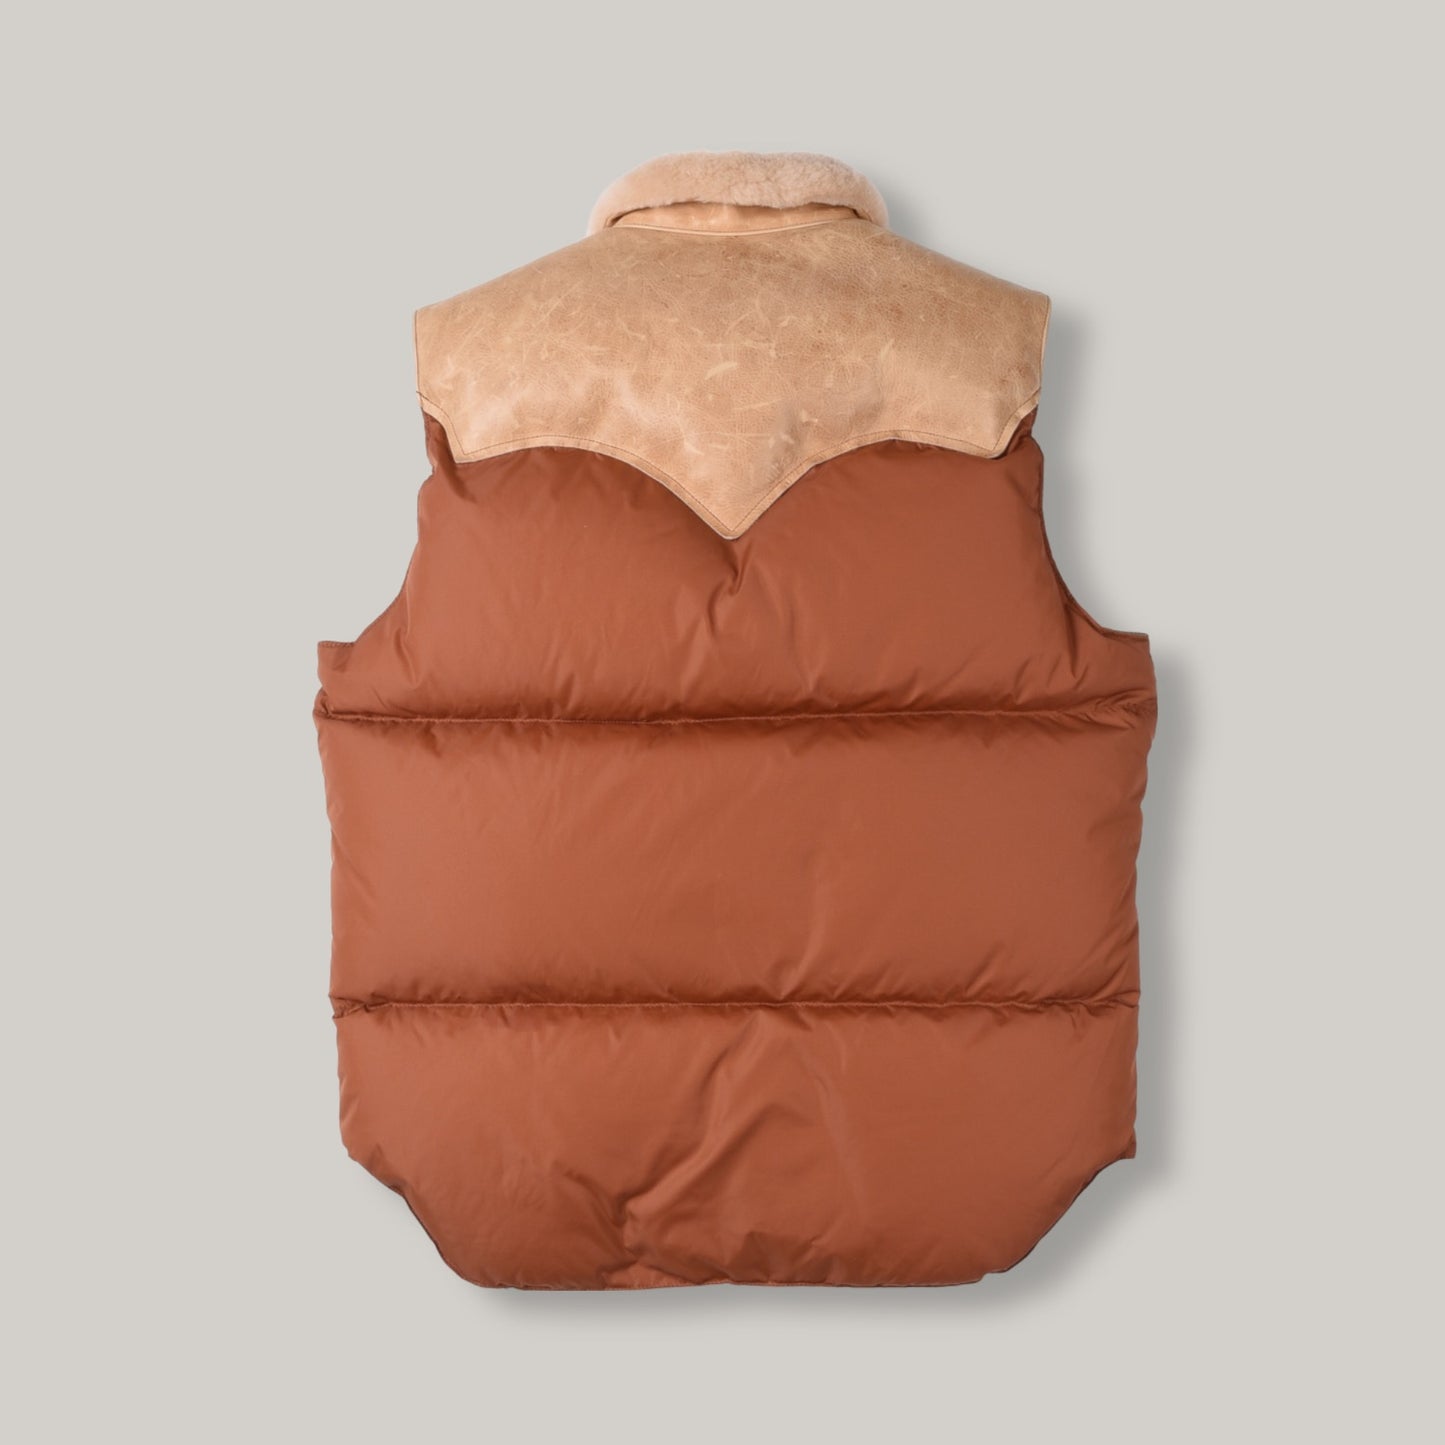 USED ROCKY MOUNTAIN FEATHERBED CHRISTY VEST - BROWN